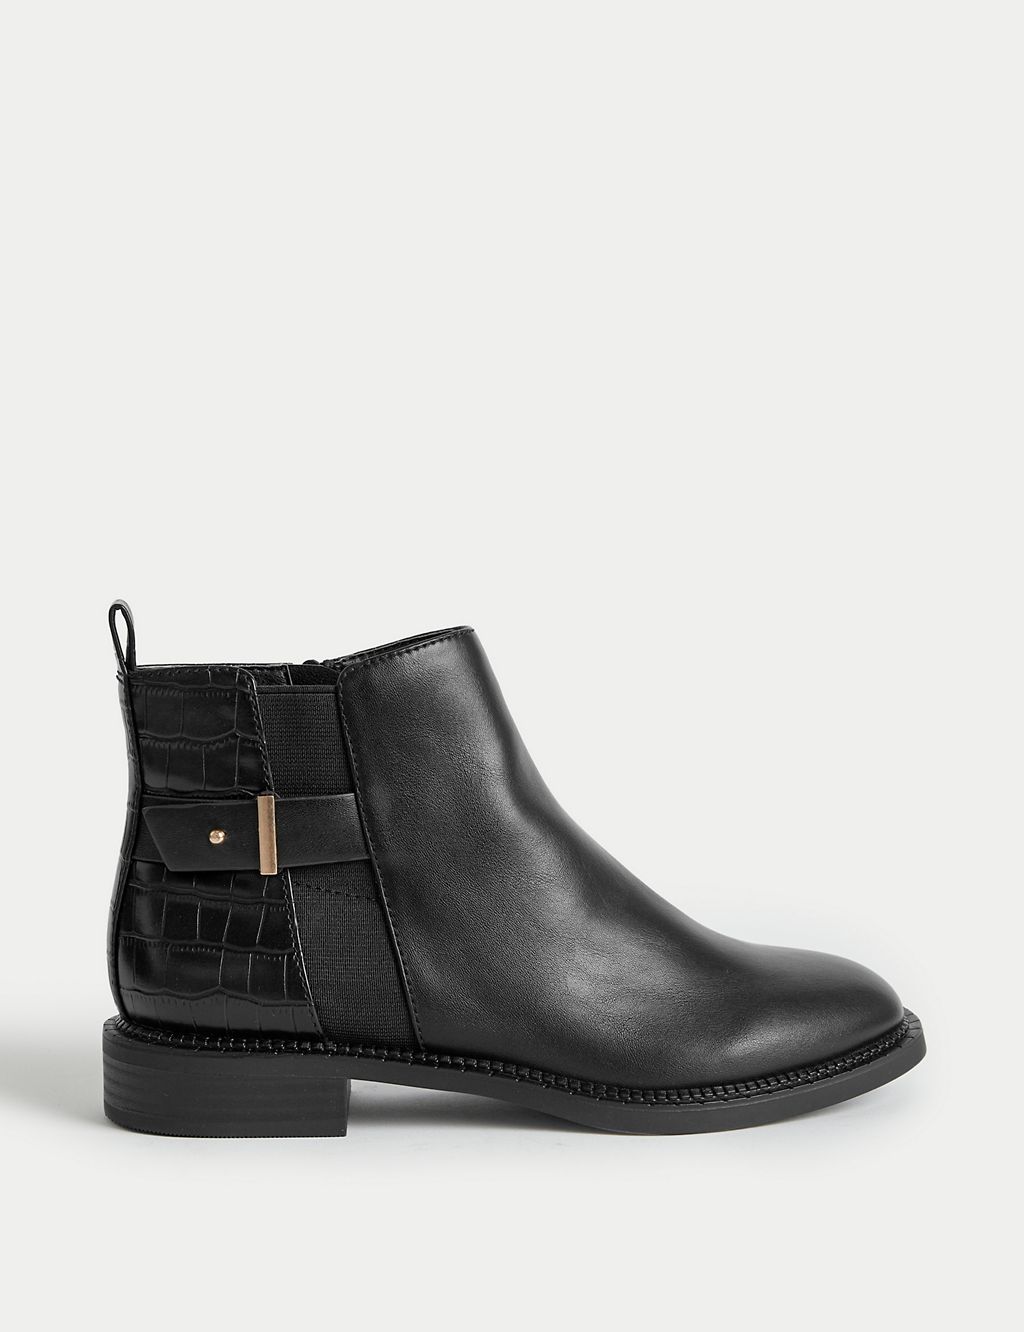 Croc Buckle Ankle Boots | M&S Collection | M&S